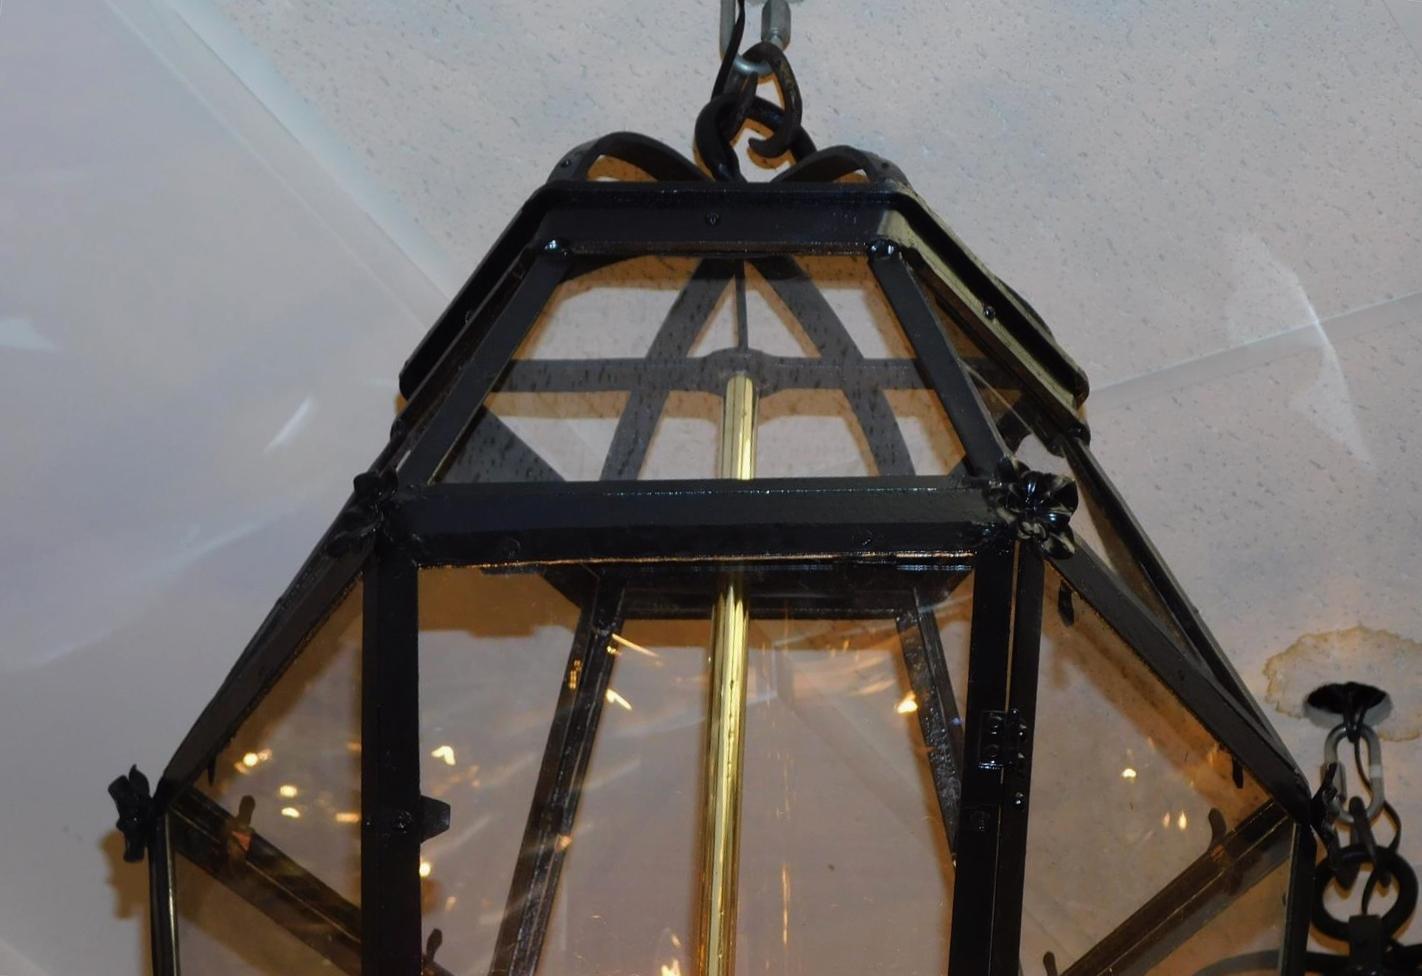 Pair of American Wrought Iron & Brass Dome Shaped Hanging Lanterns, Circa 1820 In Excellent Condition For Sale In Hollywood, SC